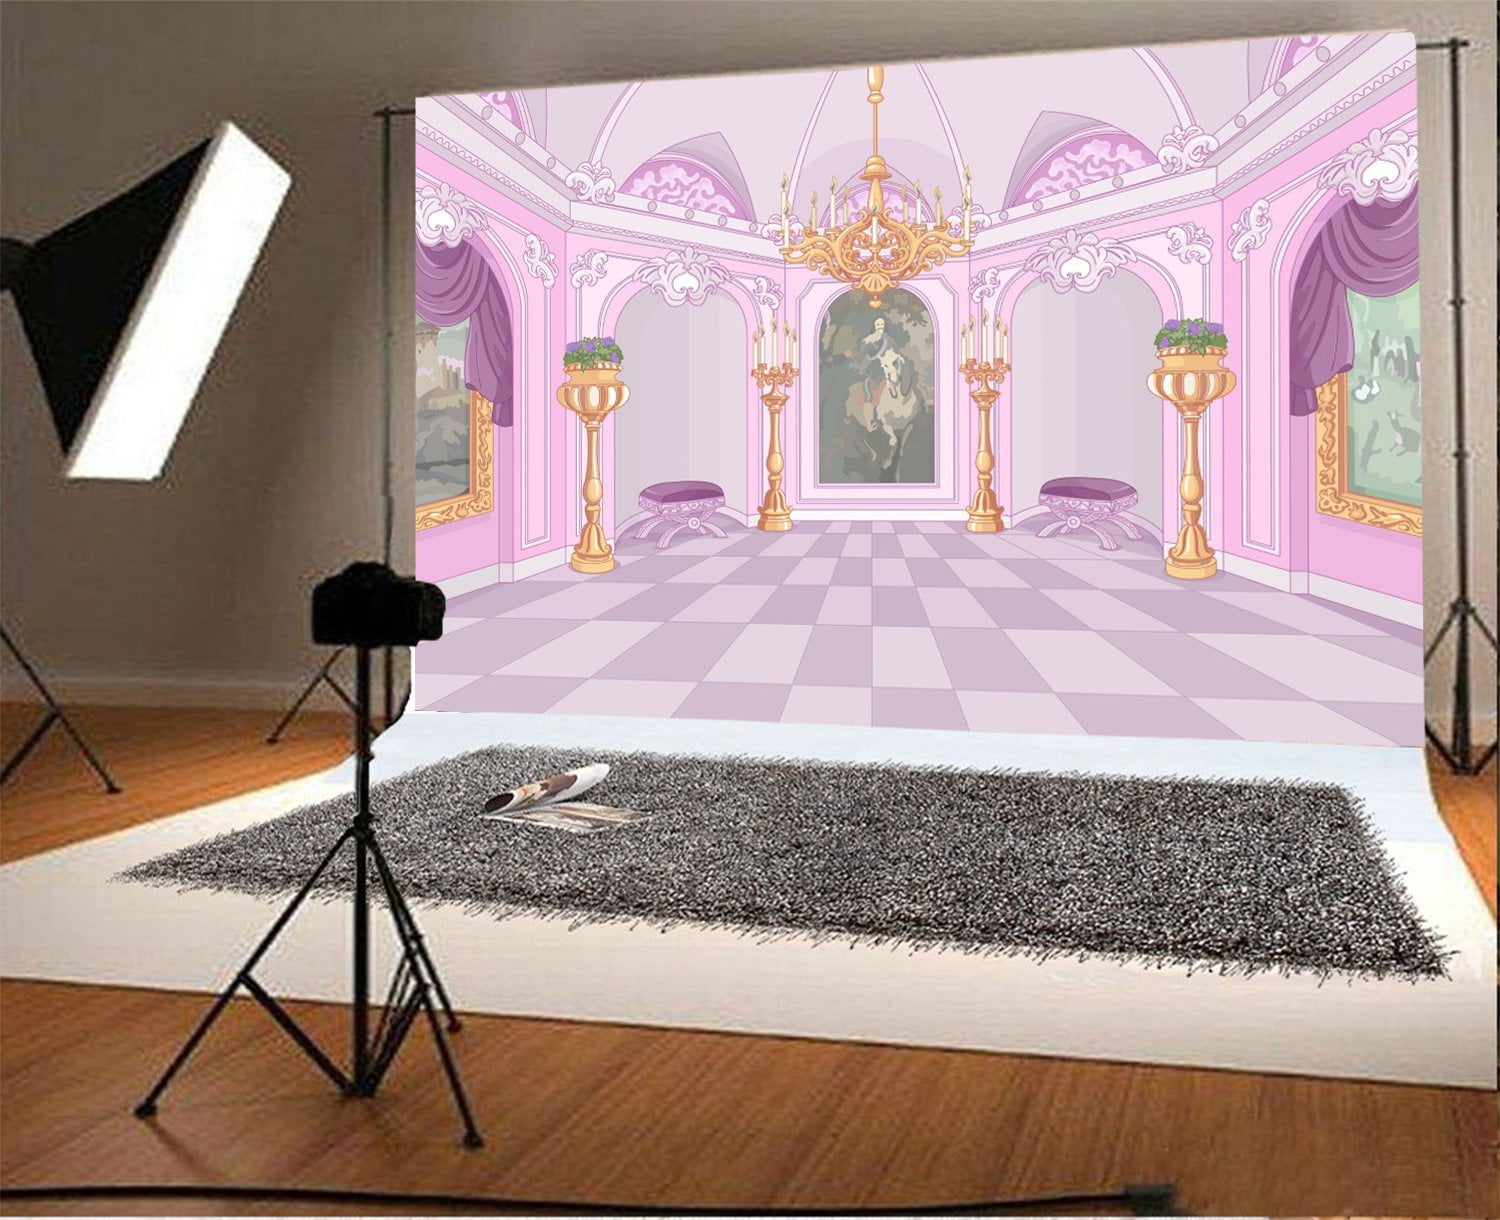 Red Carpet Stage Backdrop 8x6.5ft Vinyl Cartoon Vintage Red Carpet Stairs to Throne Spotlight Photography Background Studio Child Adult Bride Wedding Portrait Shoot Show Party Banner